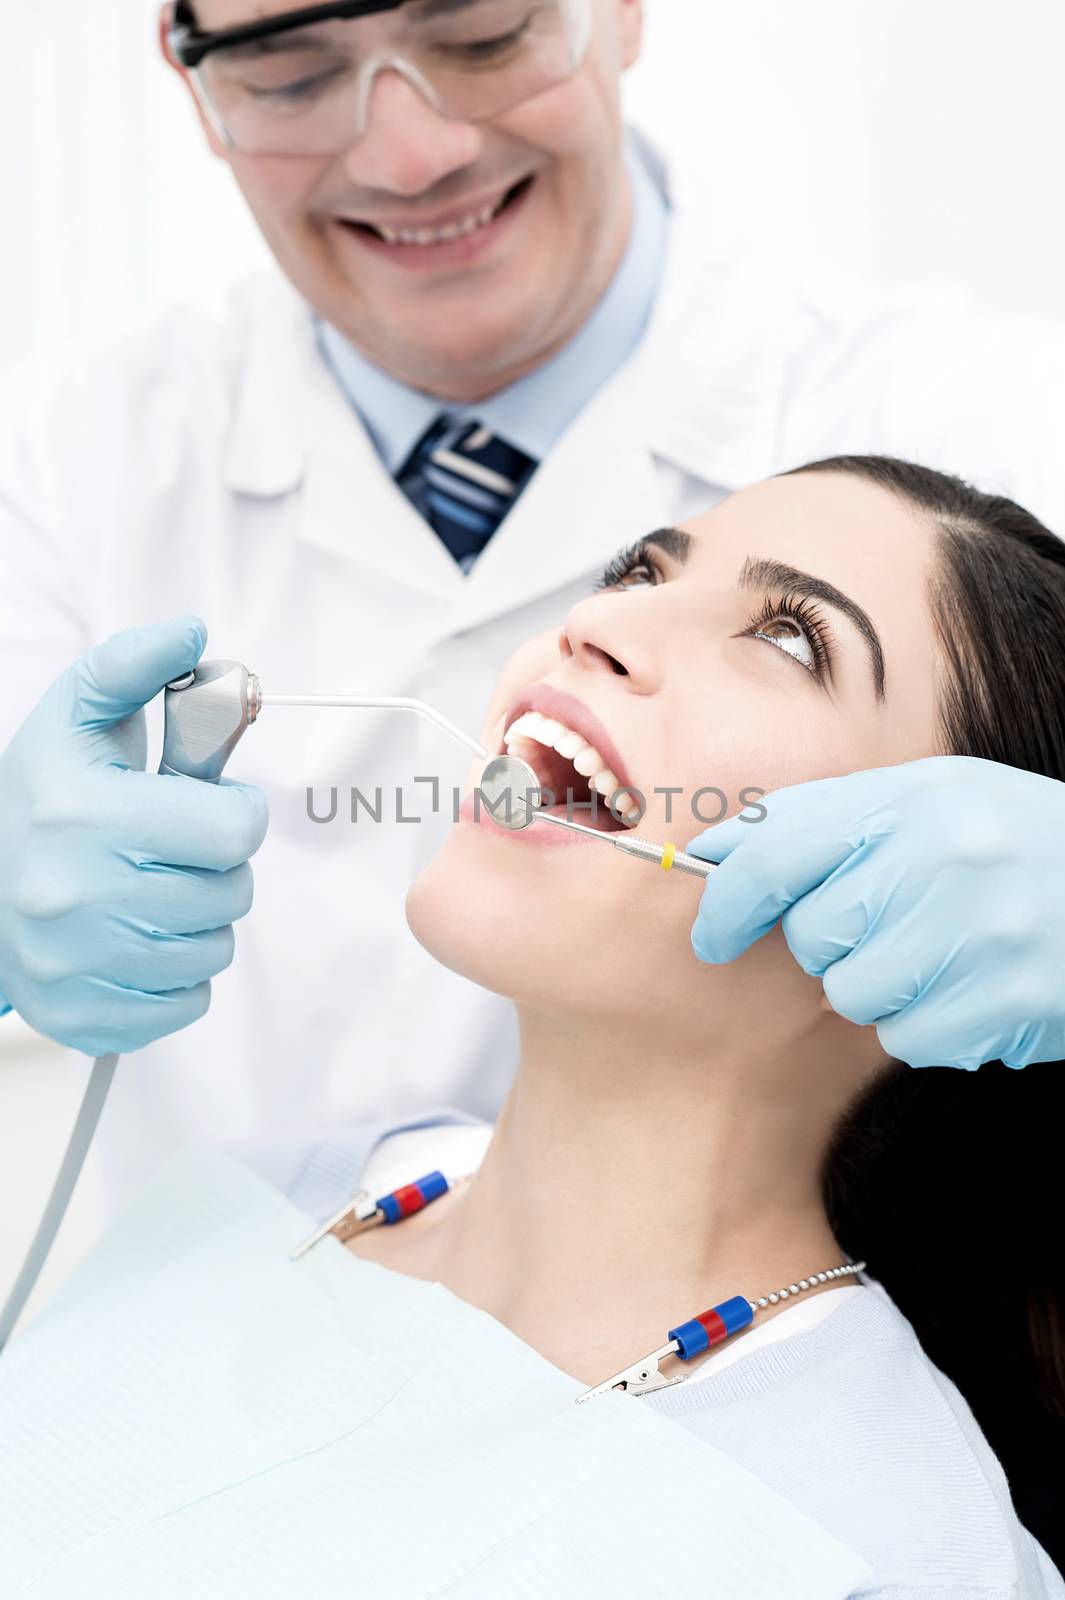 Teeth whitening at dental office by stockyimages